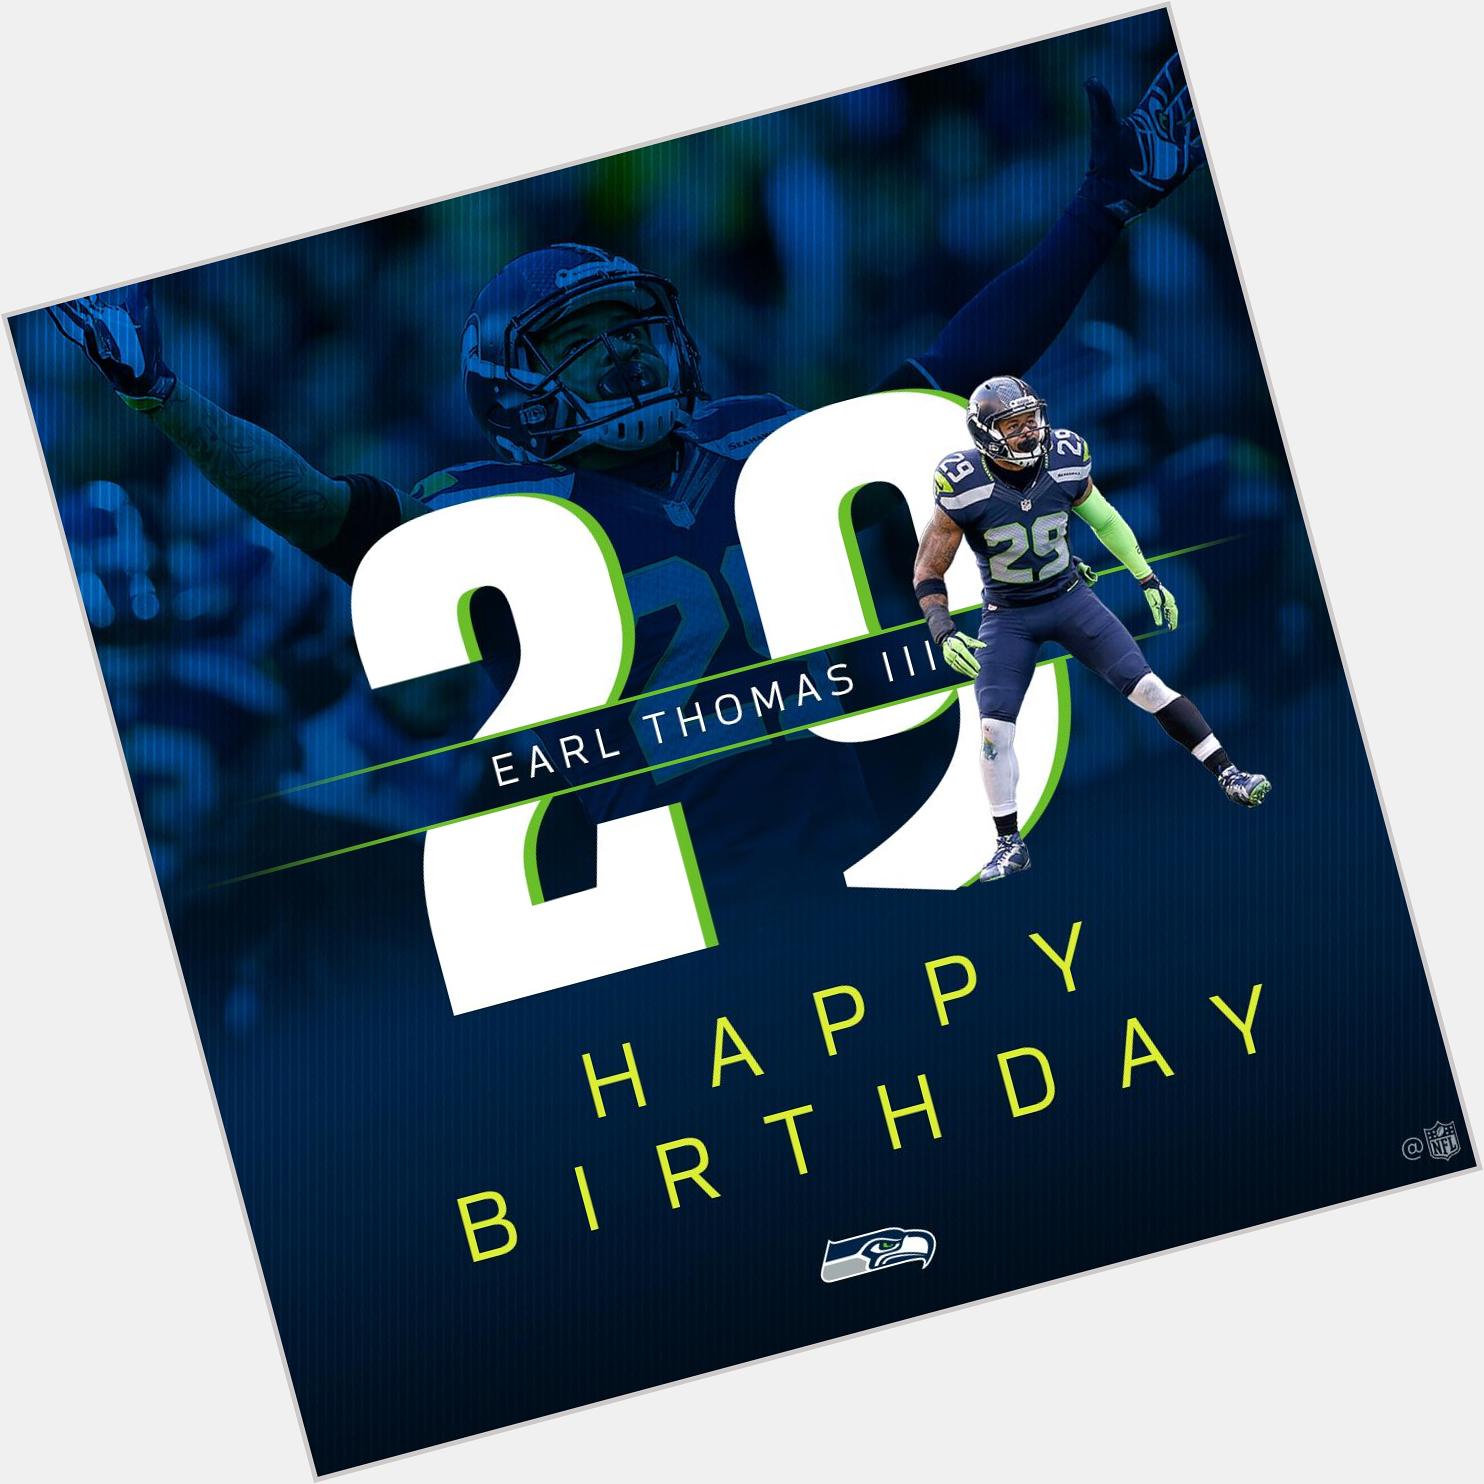 3x All-Pro. 6x Pro Bowler. And a SuperBowl champion.

Let\s all wish Earl_Thomas a HAPPY BIRTHDAY! 